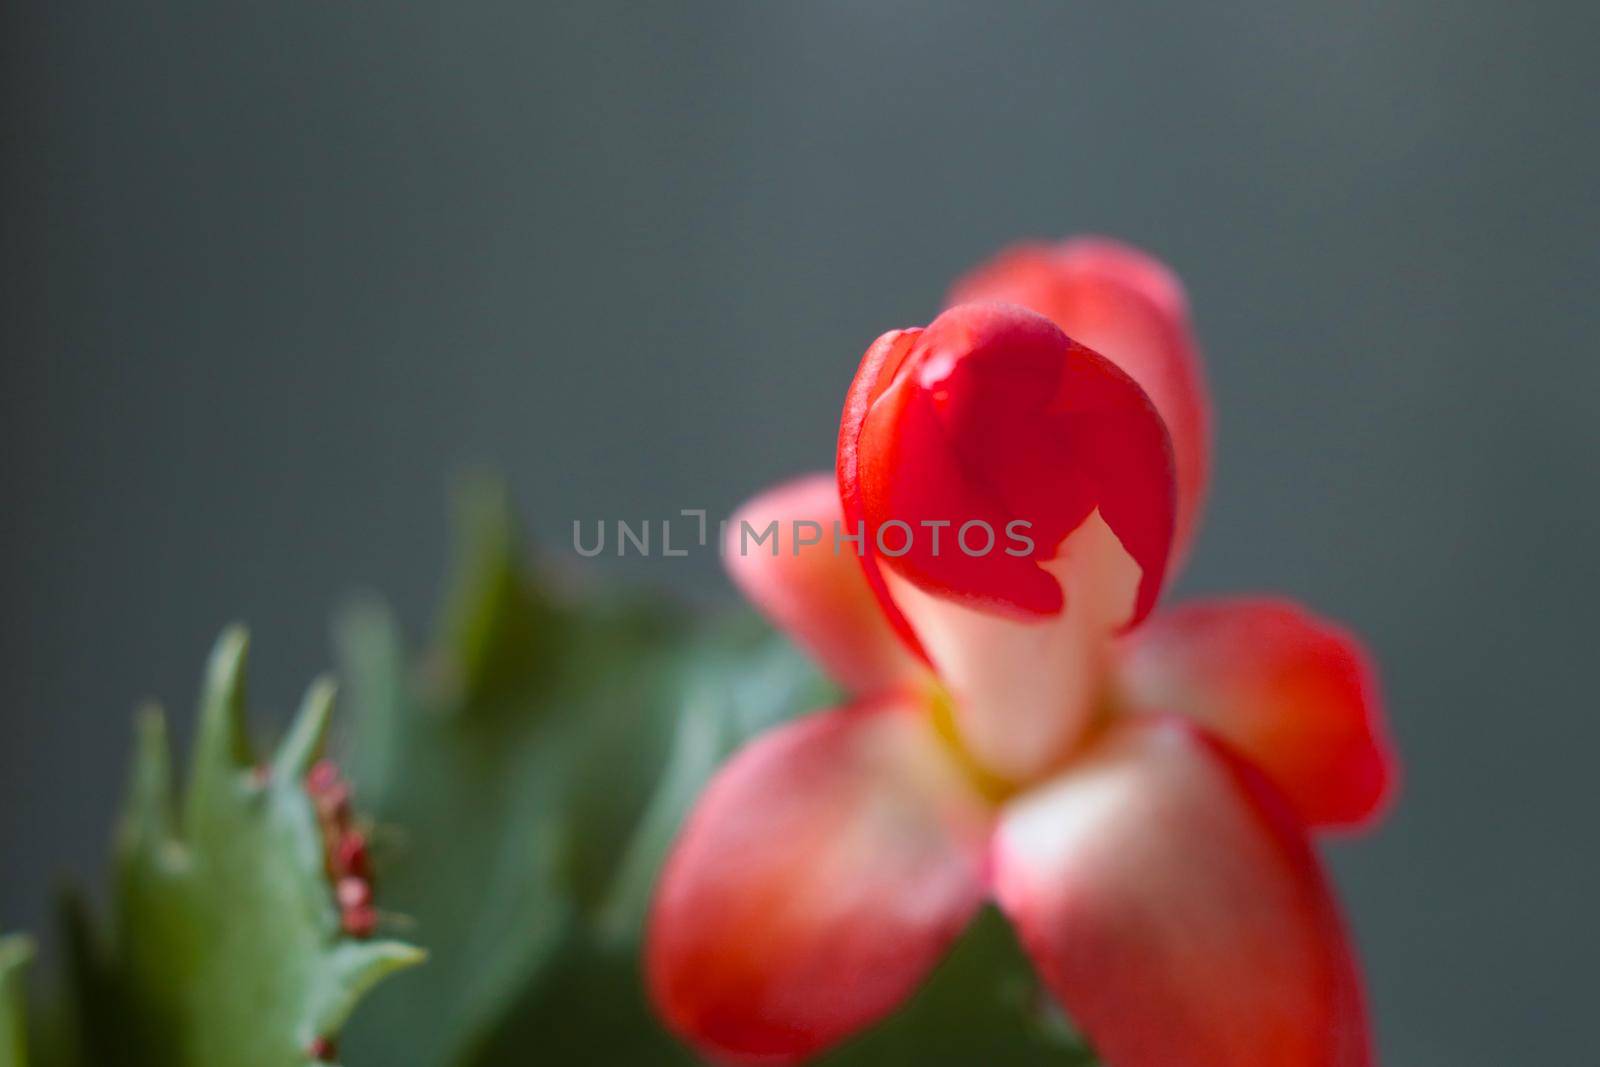 Schlumbergera, the Christmas cactus is a cute succulent plant that blooms in autumn or winter